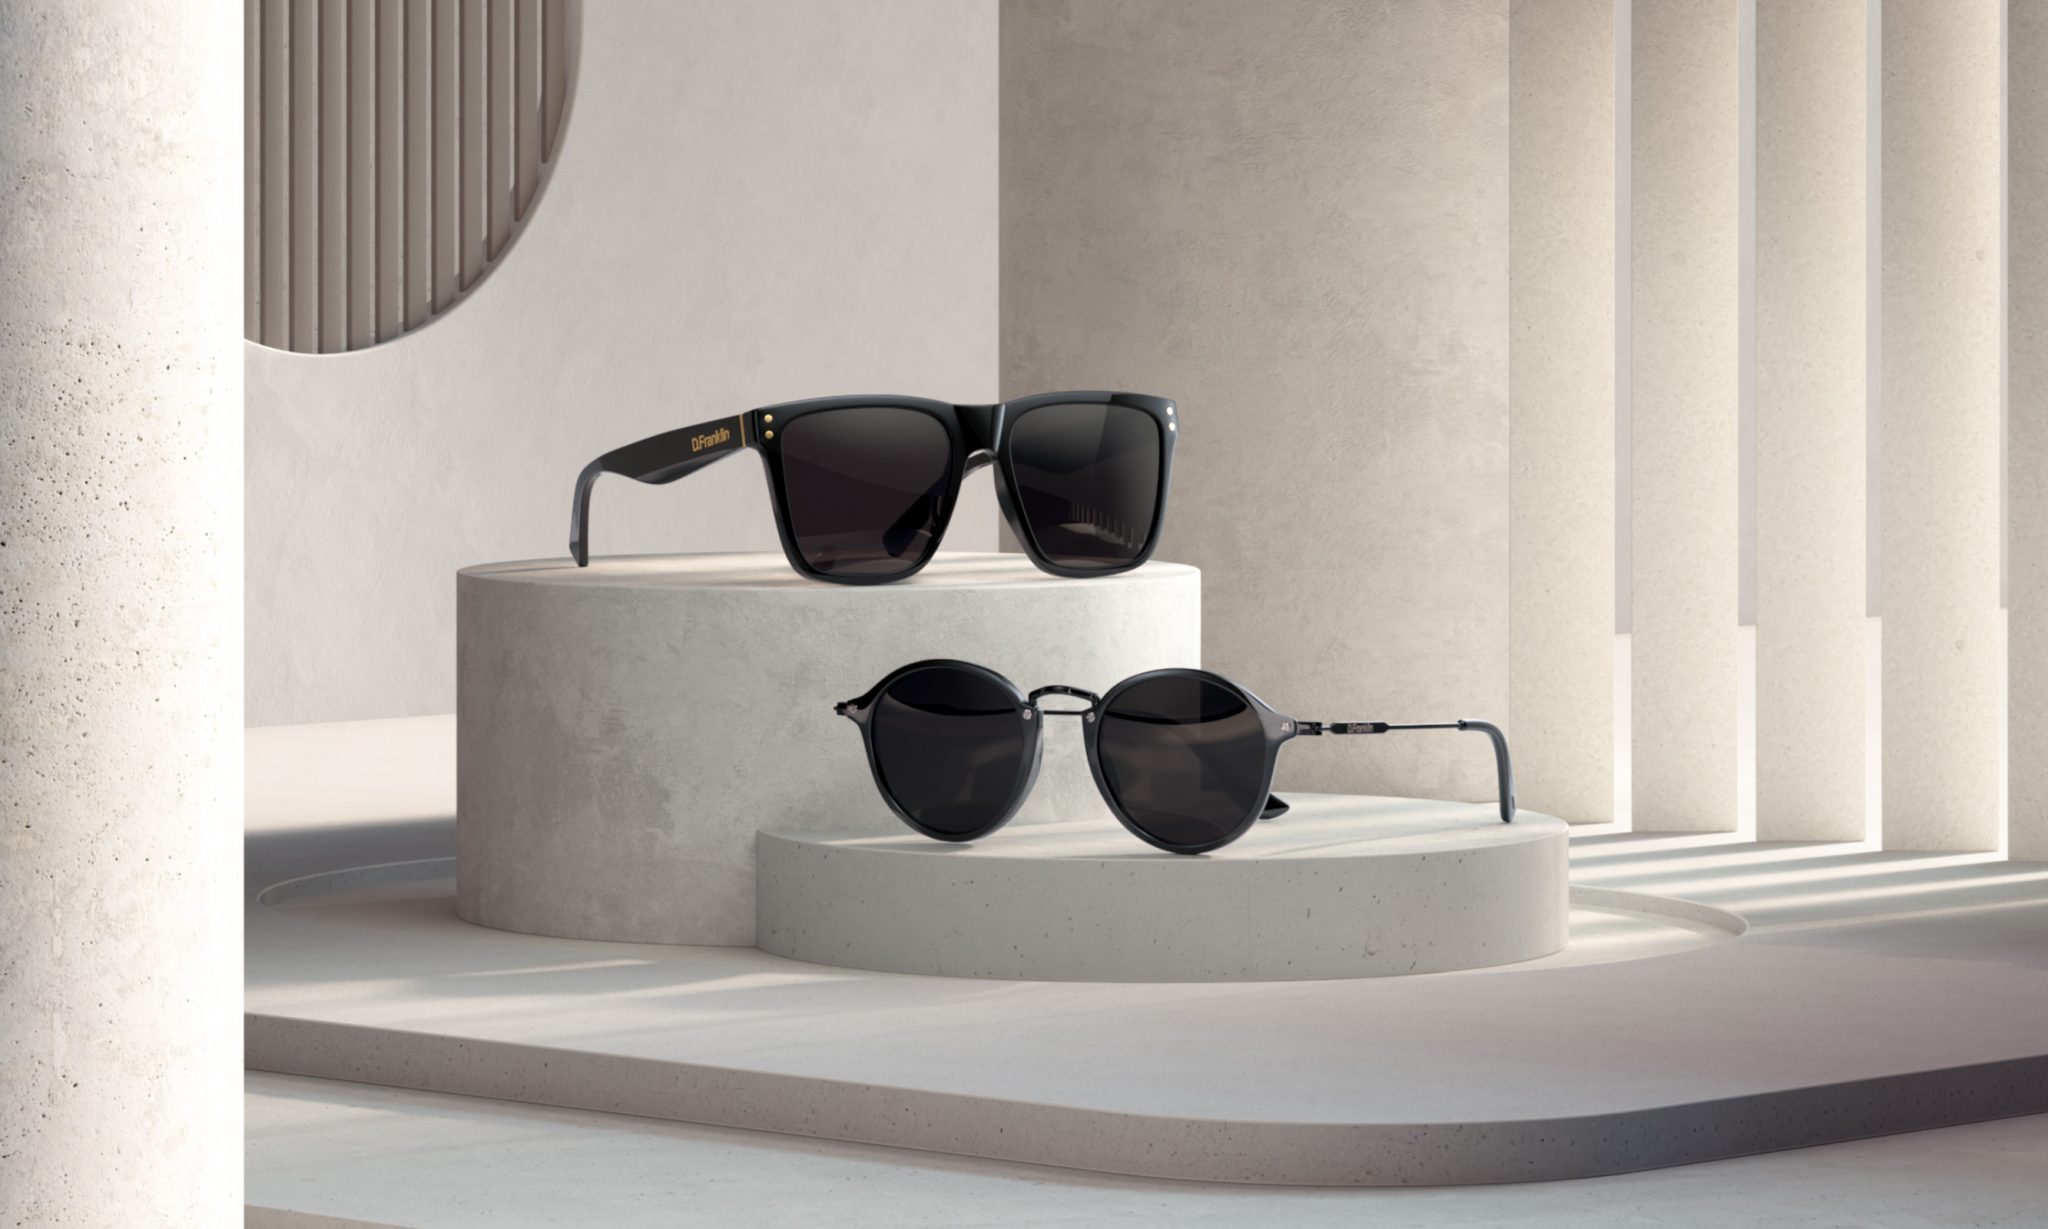 Discover more than 151 dr franklin sunglasses best